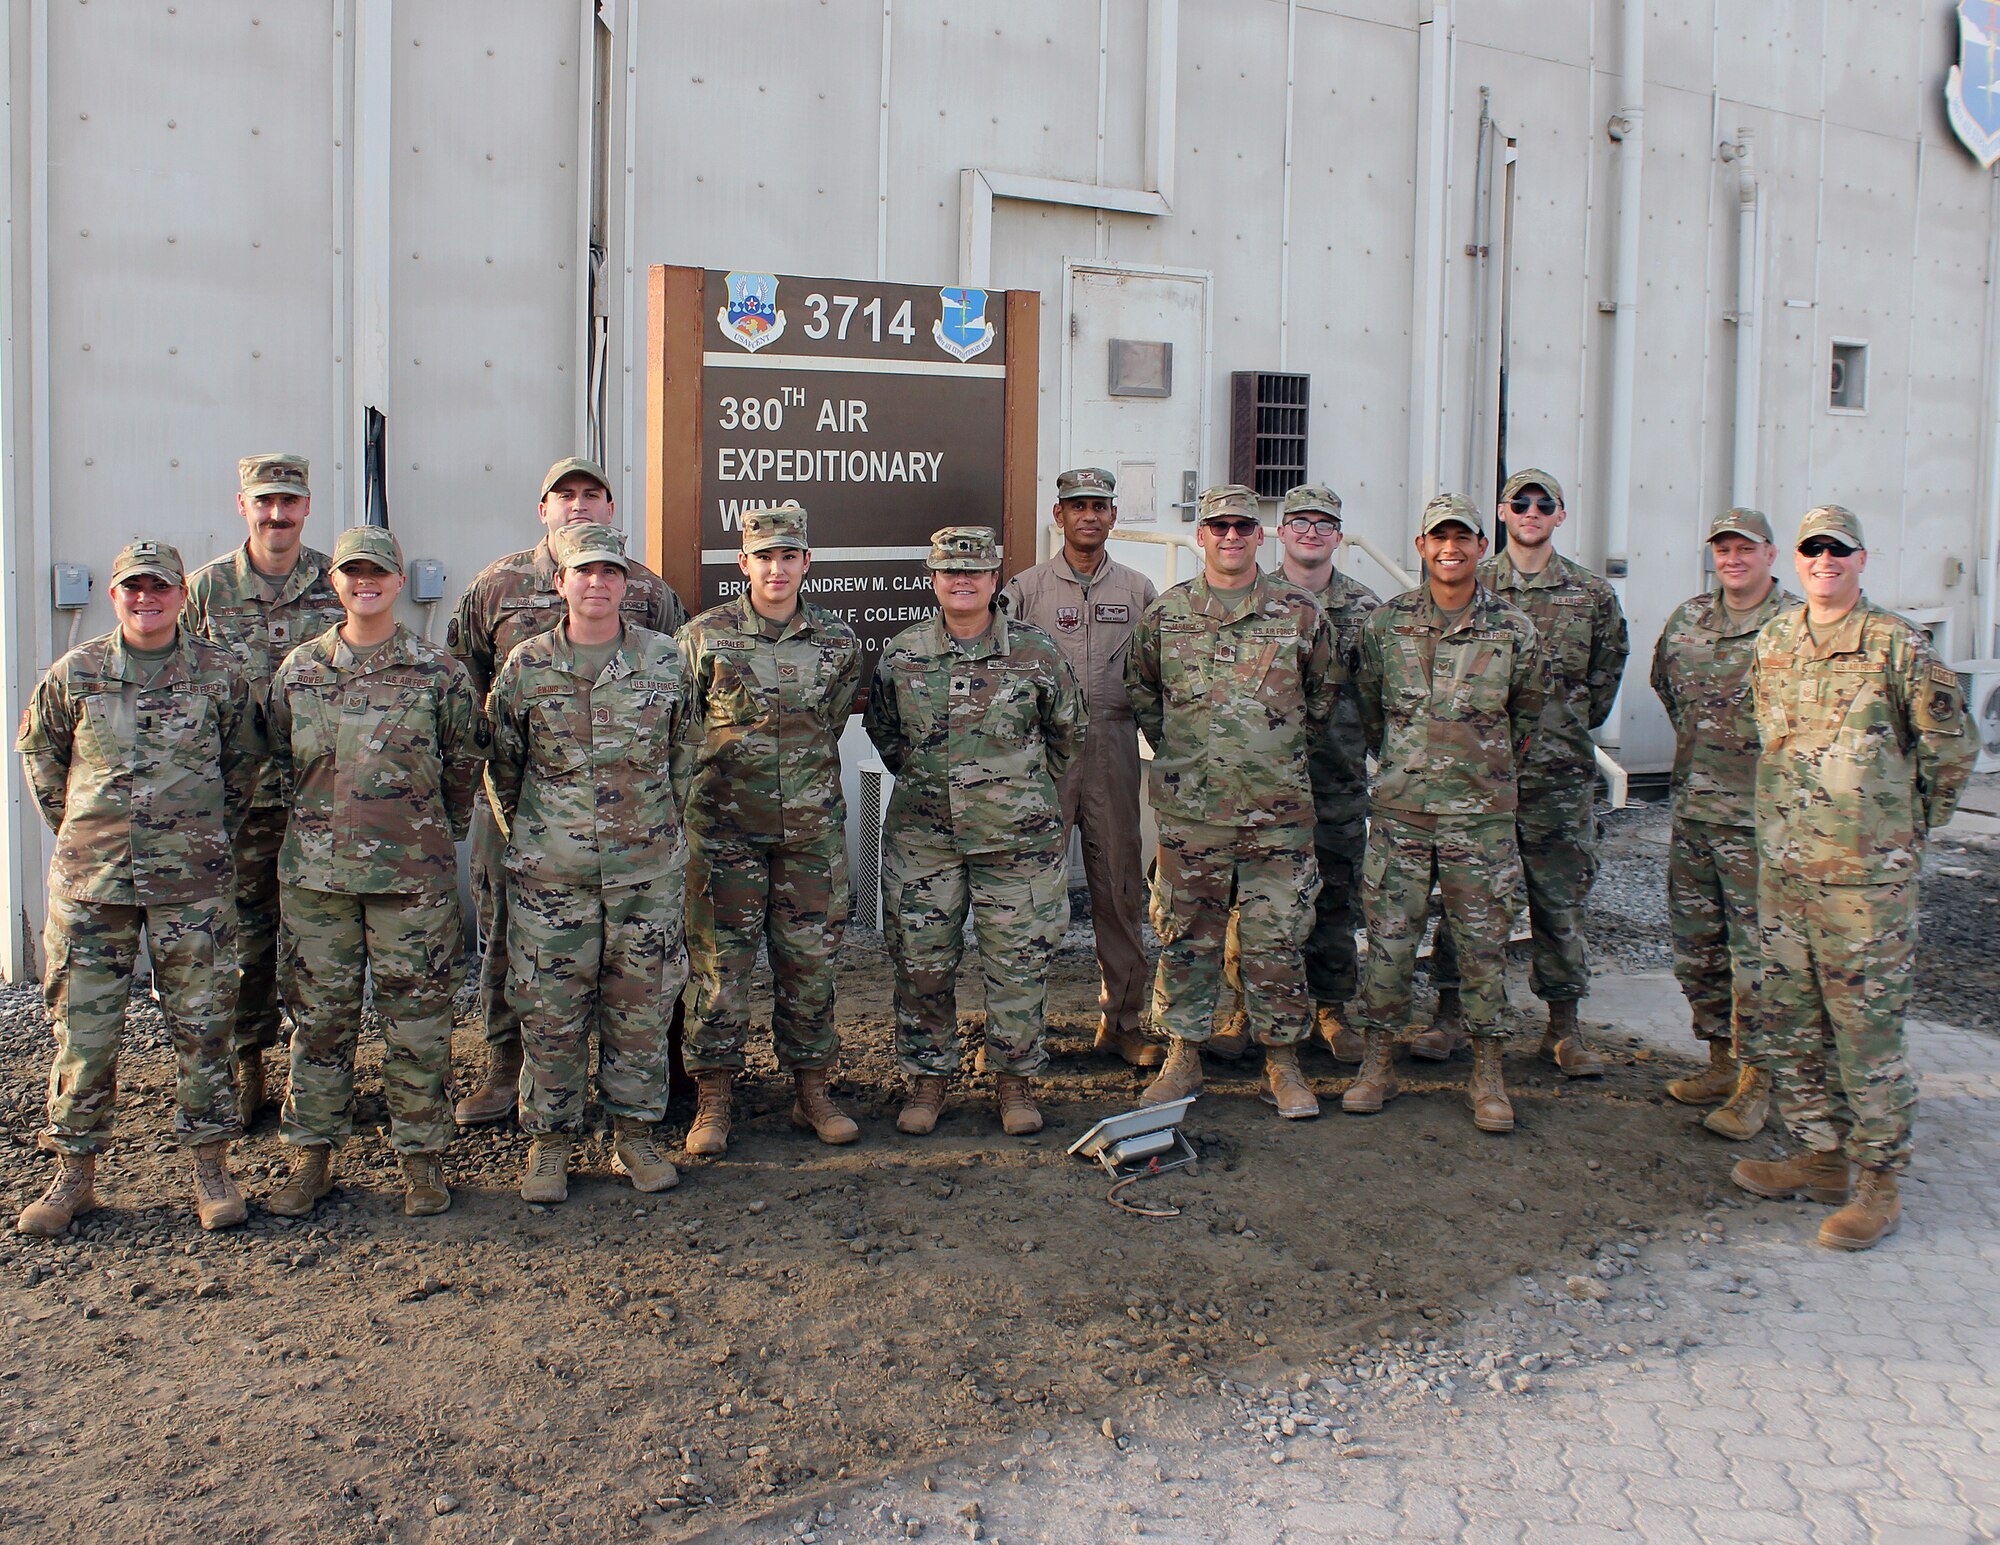 Group photo of Airmen from the 185th ARW in Al Dhafra Air Base